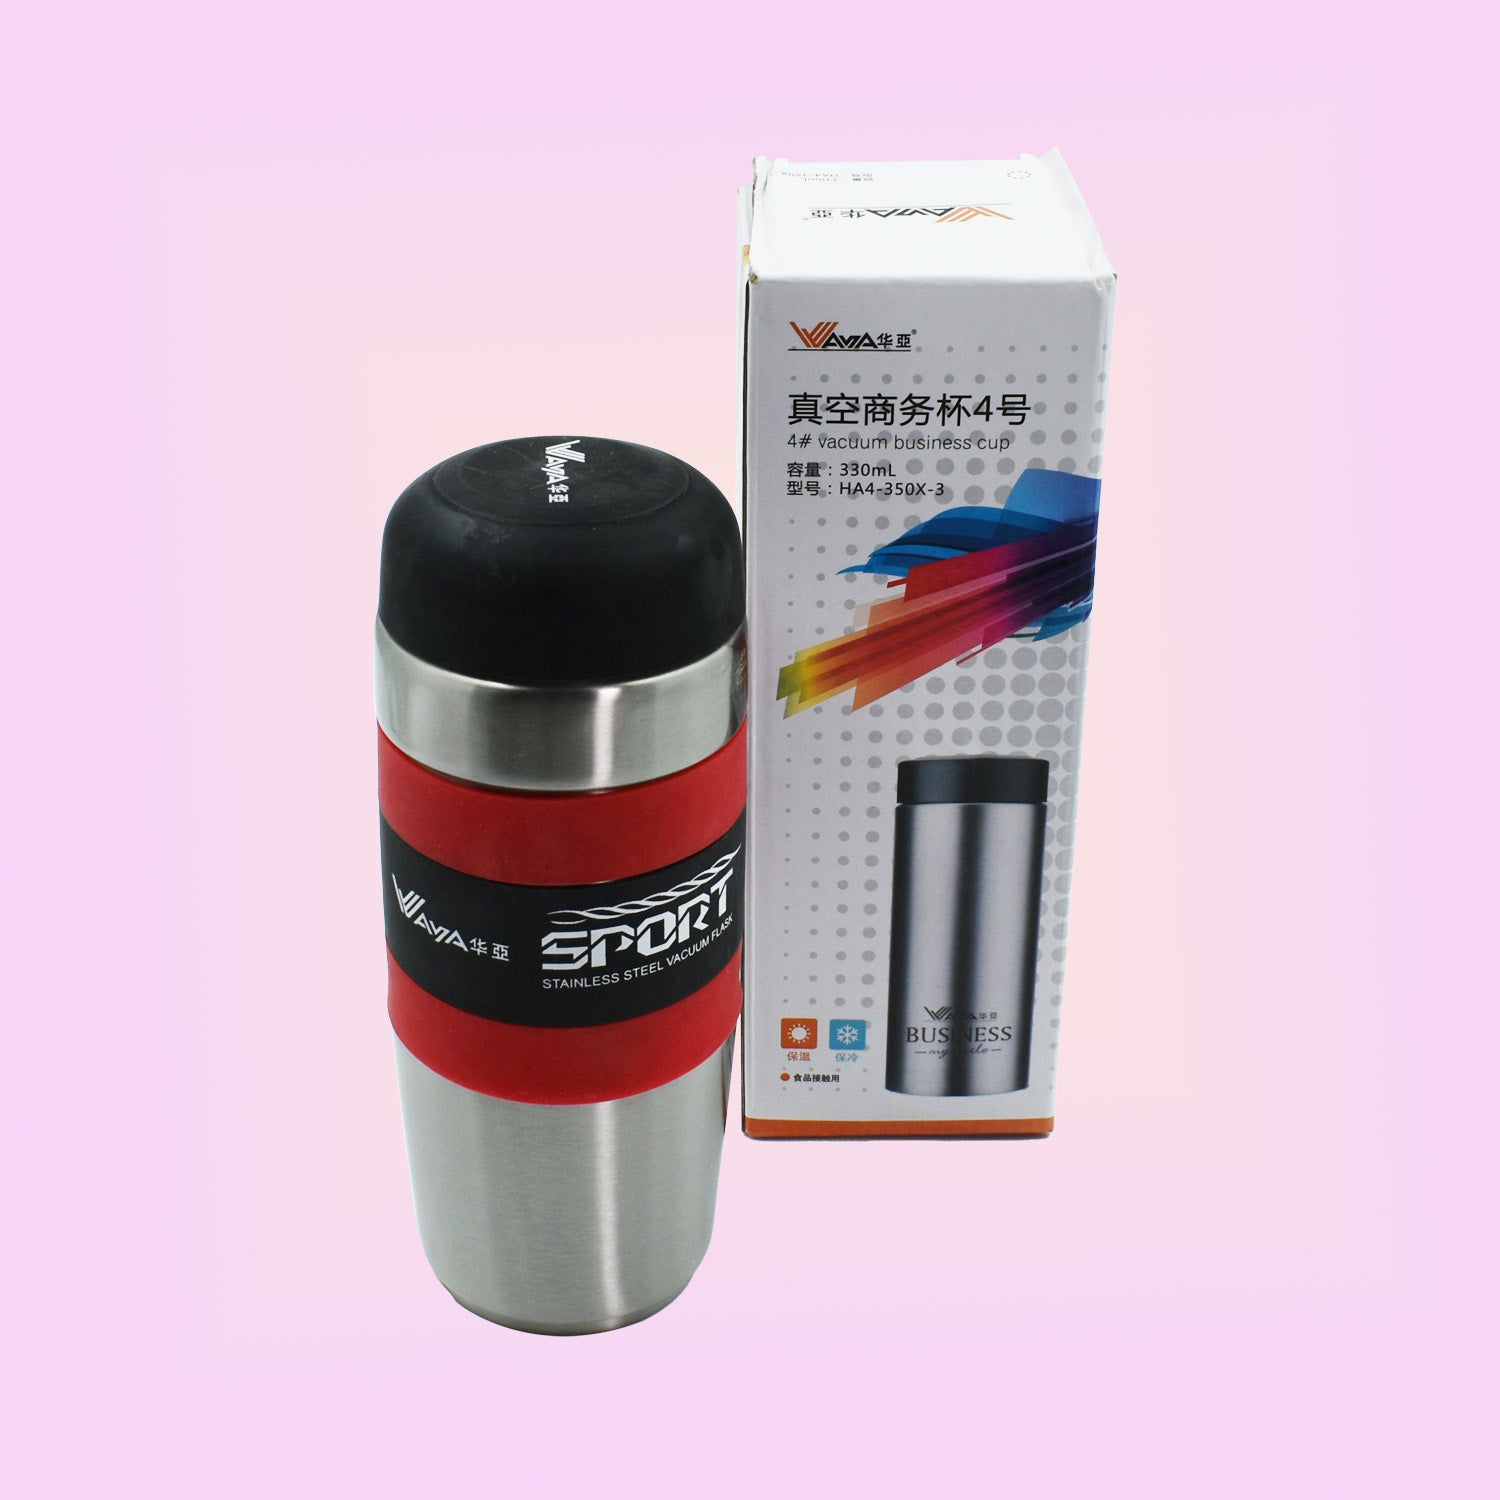 6846 Steel Travel Mug/Tumbler/Cup, Double Walled With Rubber Grip 500ml. DeoDap